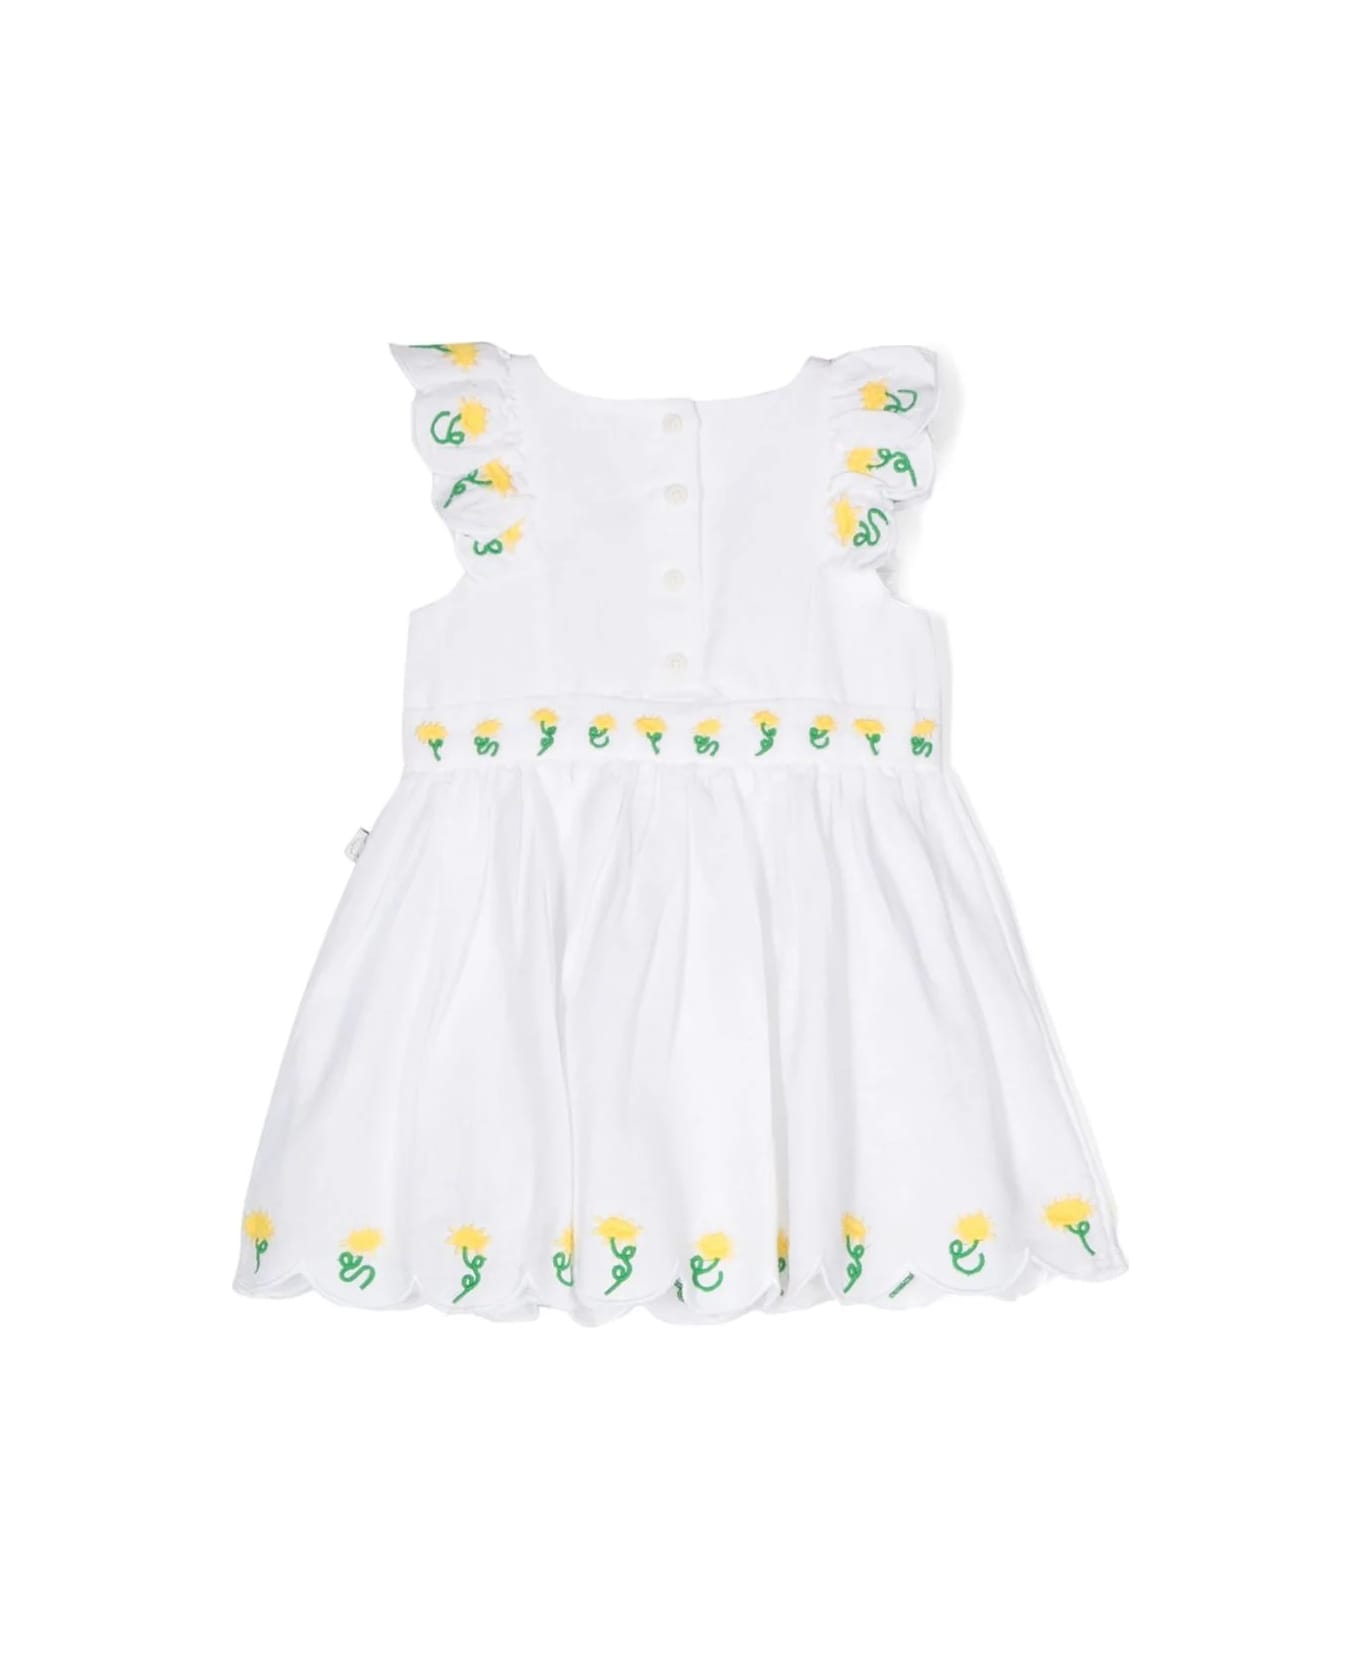 Stella McCartney Kids White Dress With Flower Embroidery - White